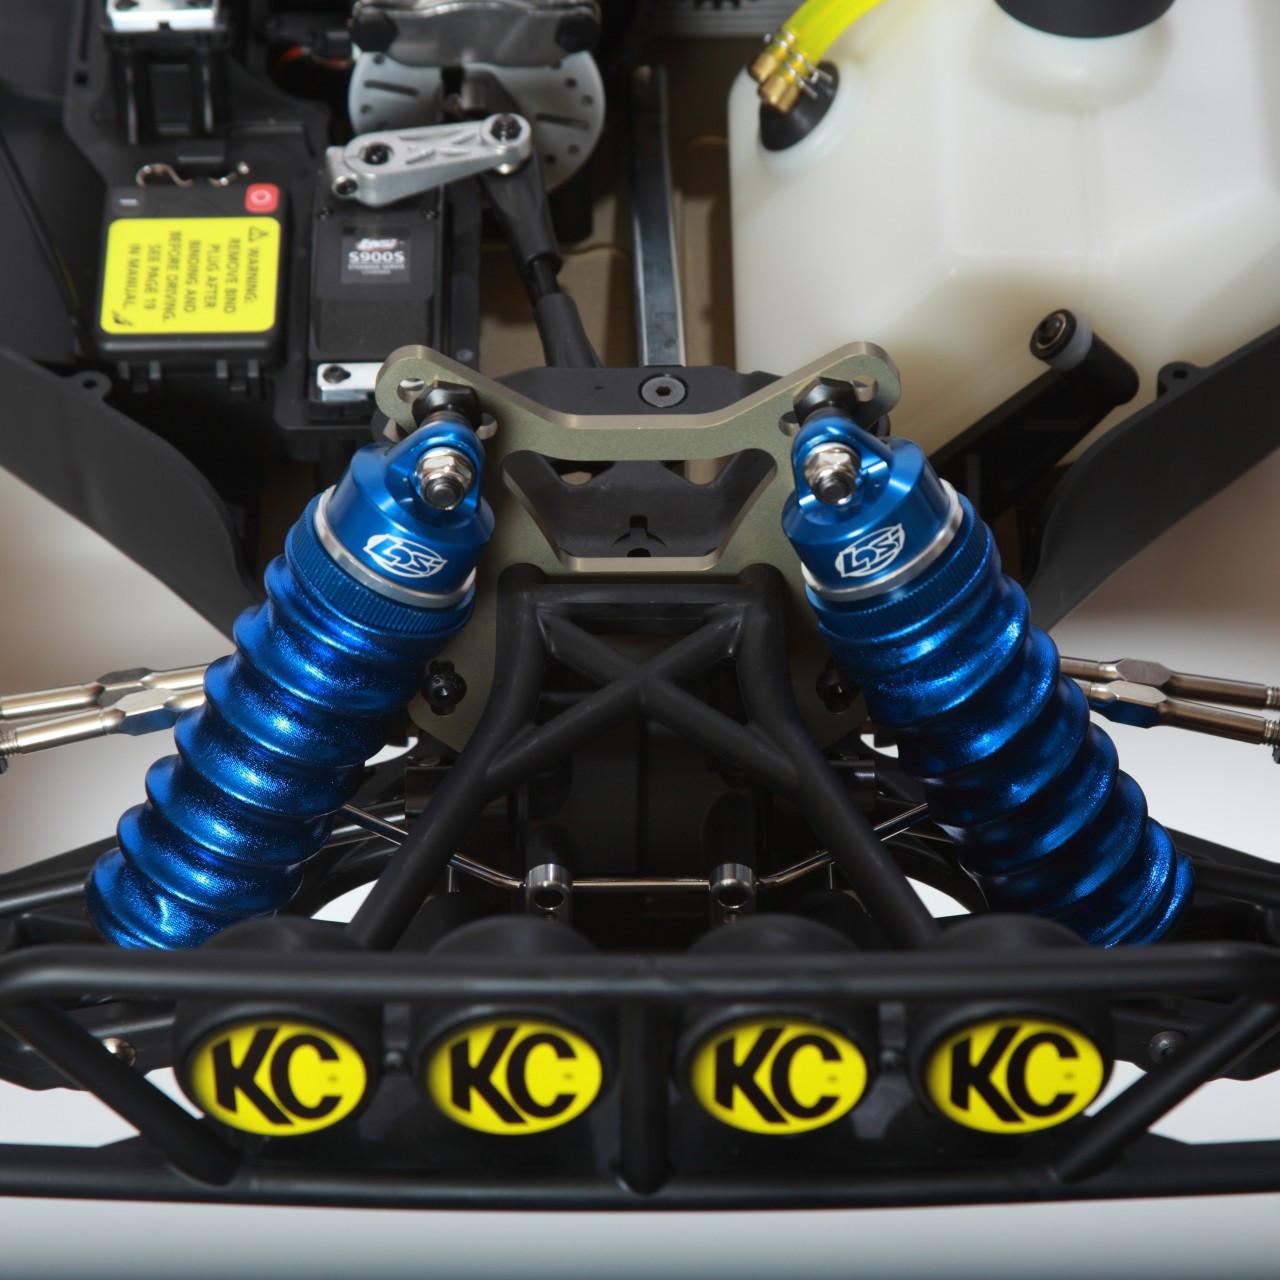 Check out our Metalic Blue shock boots mounted on our 5ive-T shop truck!